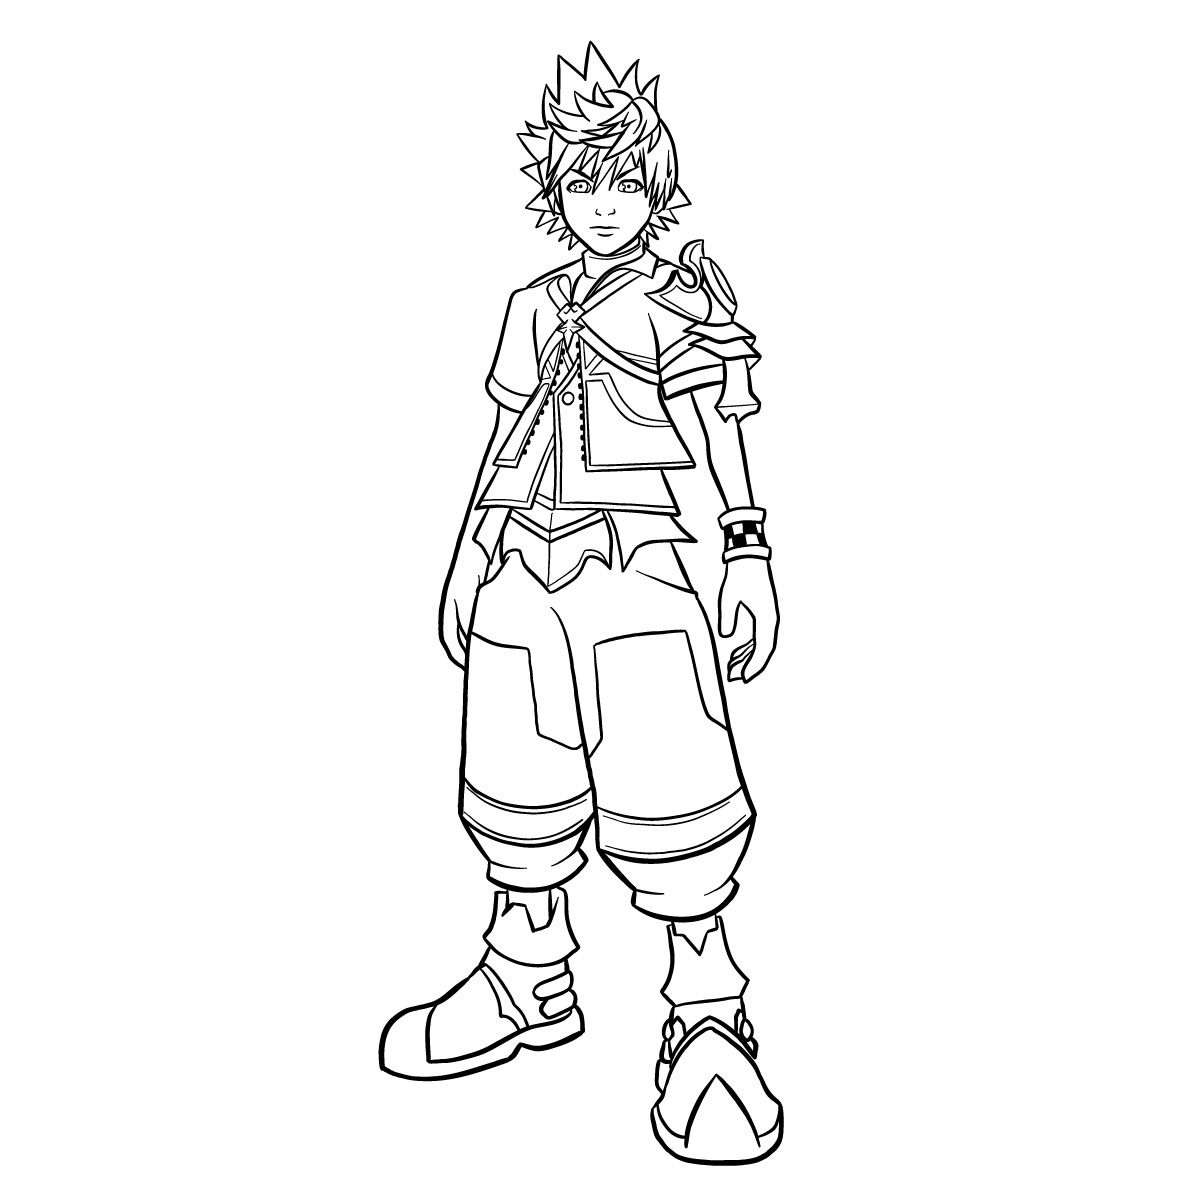 How to draw Ventus - final step